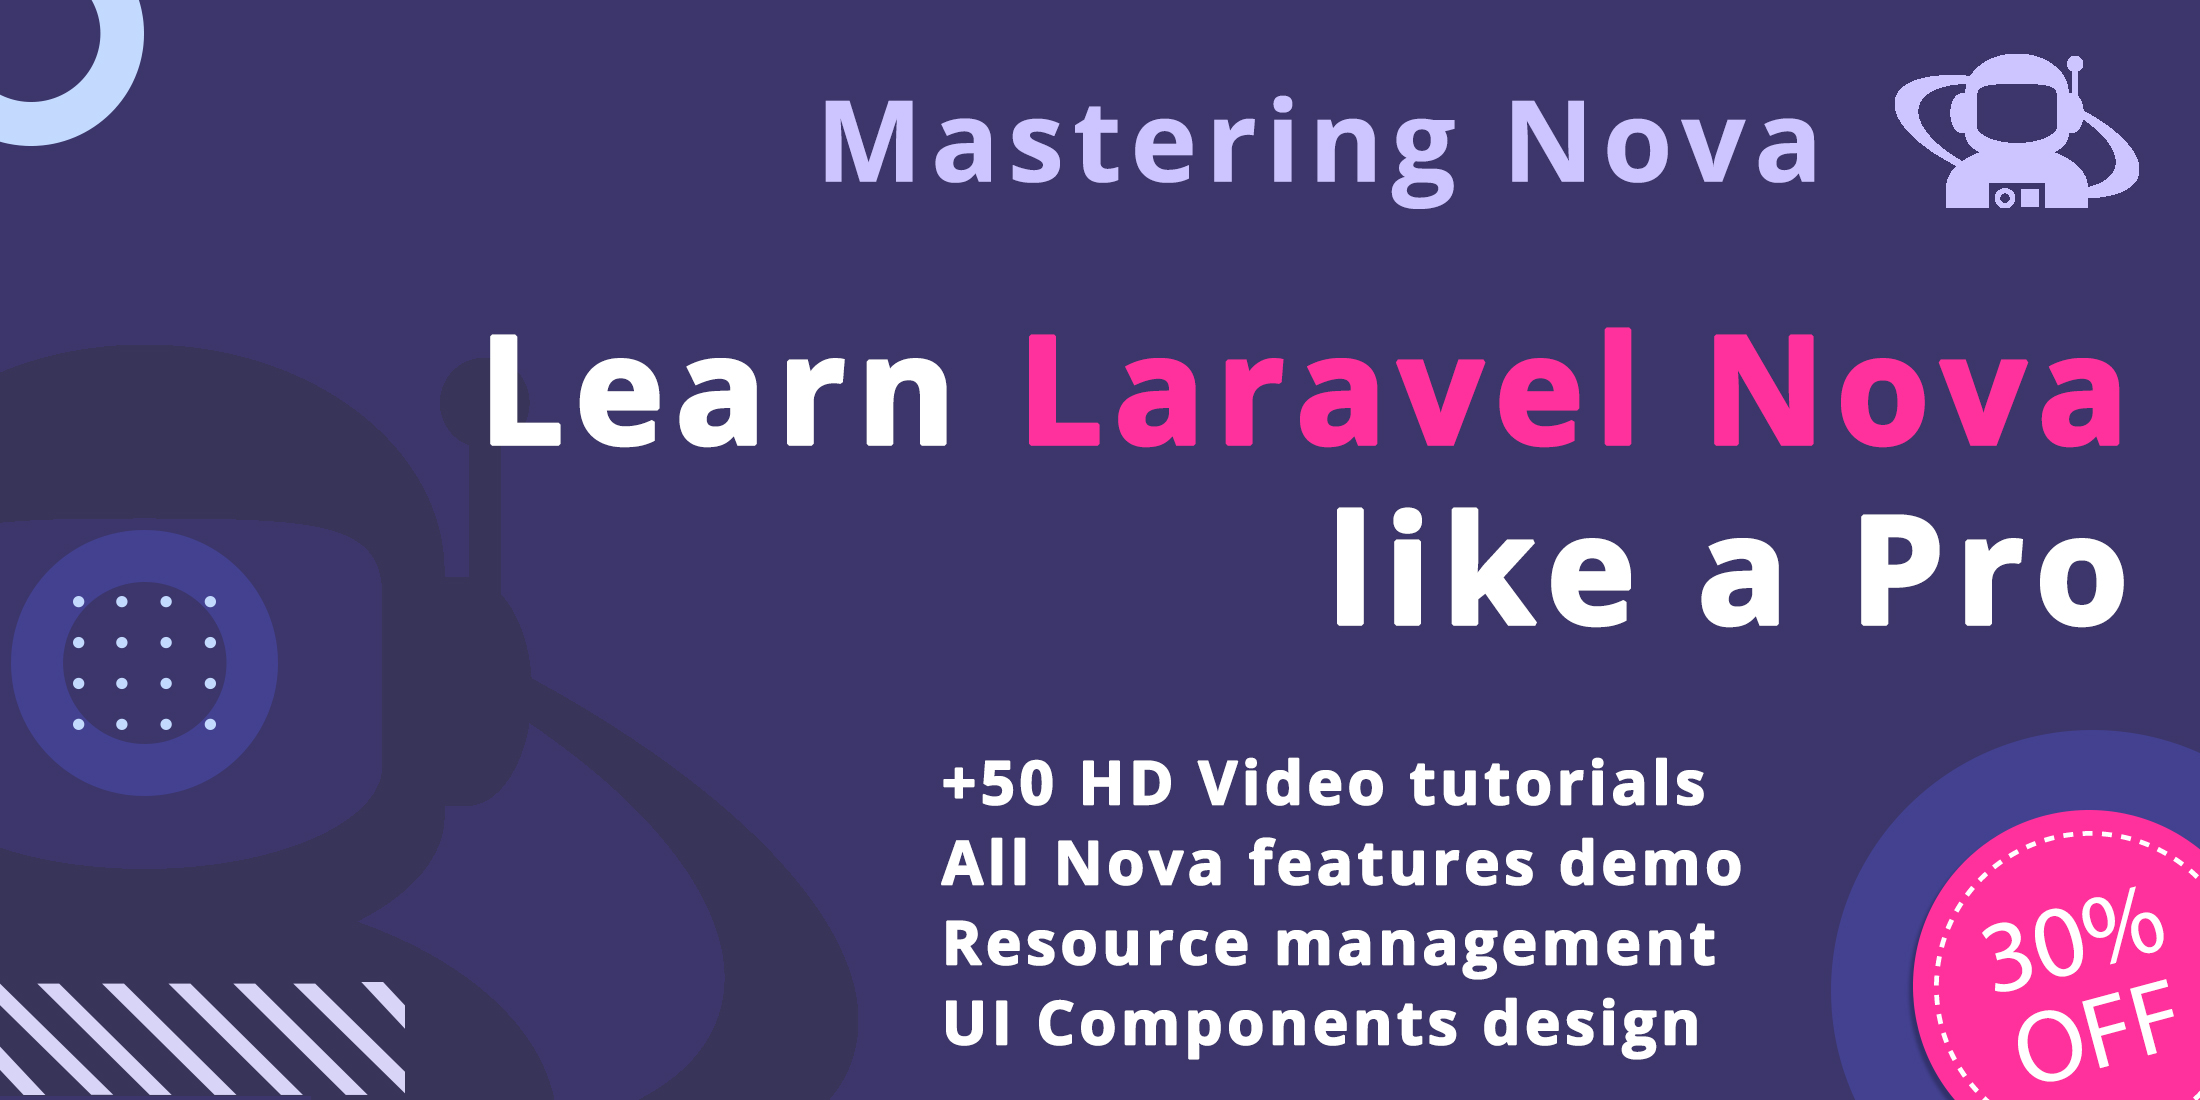 The first premium course for Laravel Nova was released! image